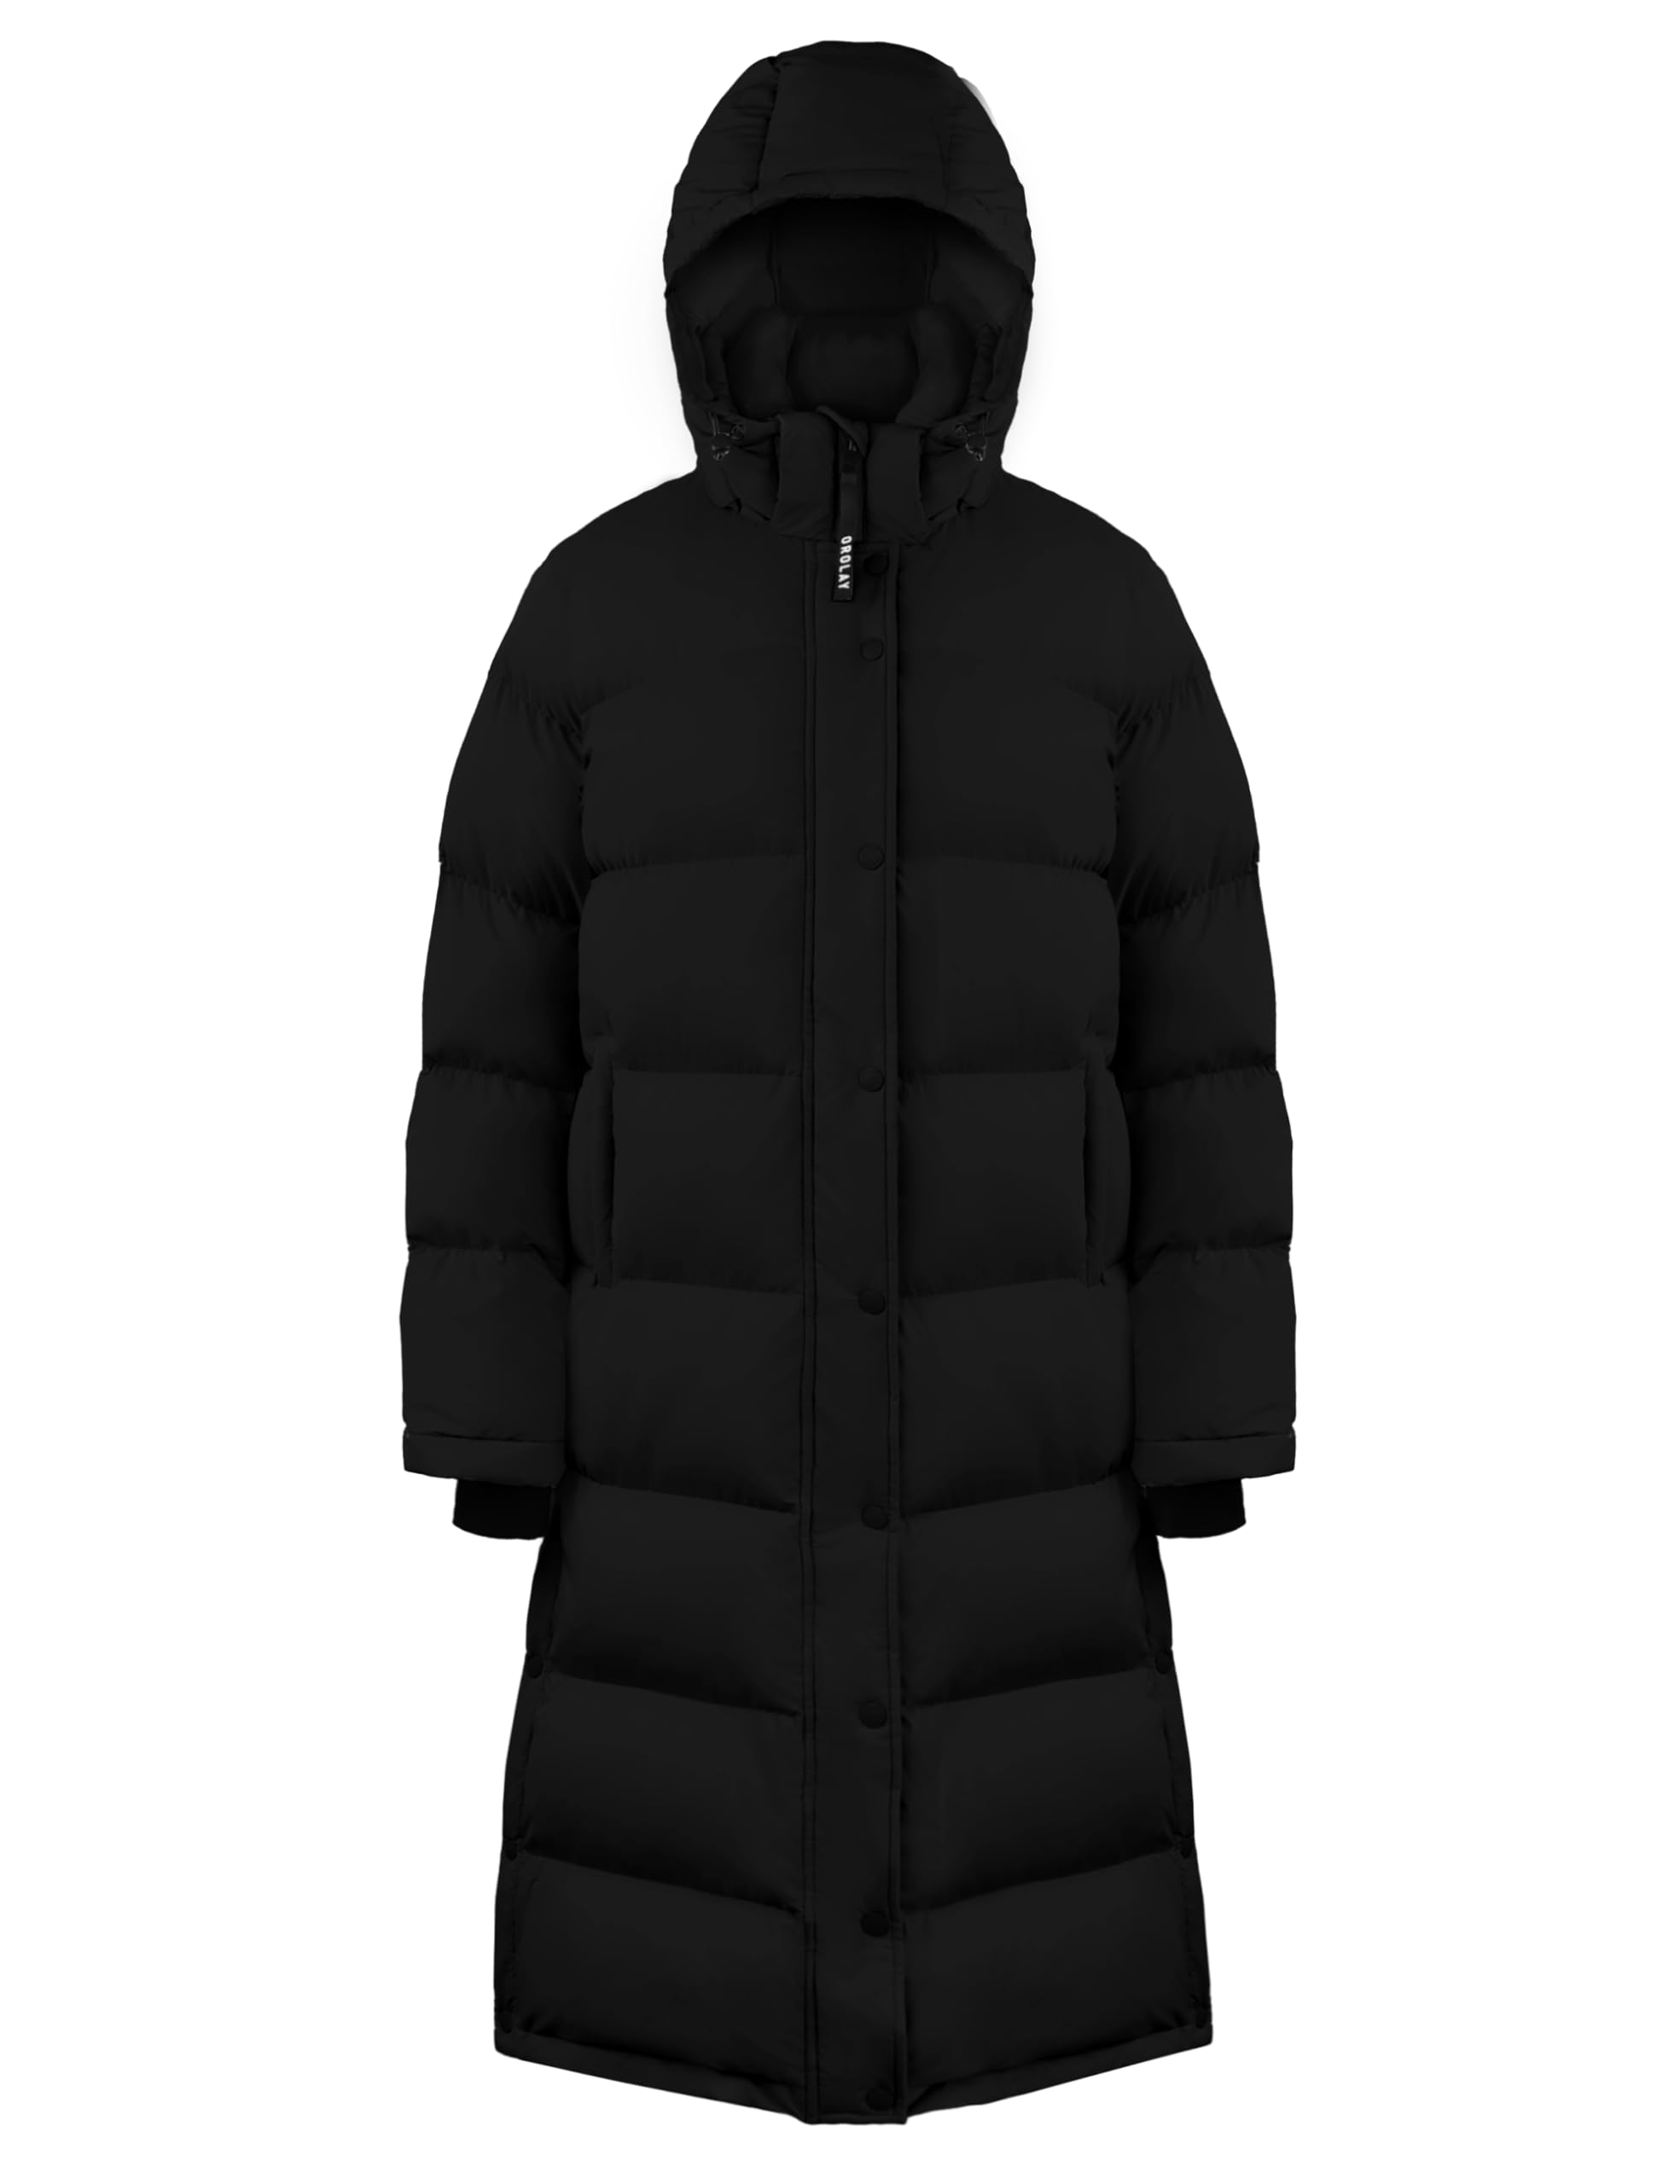 Orolay Women's Maxi Puffer Jacket Winter Warm Down Coat Casual Loose Jacket with Detachable Hood